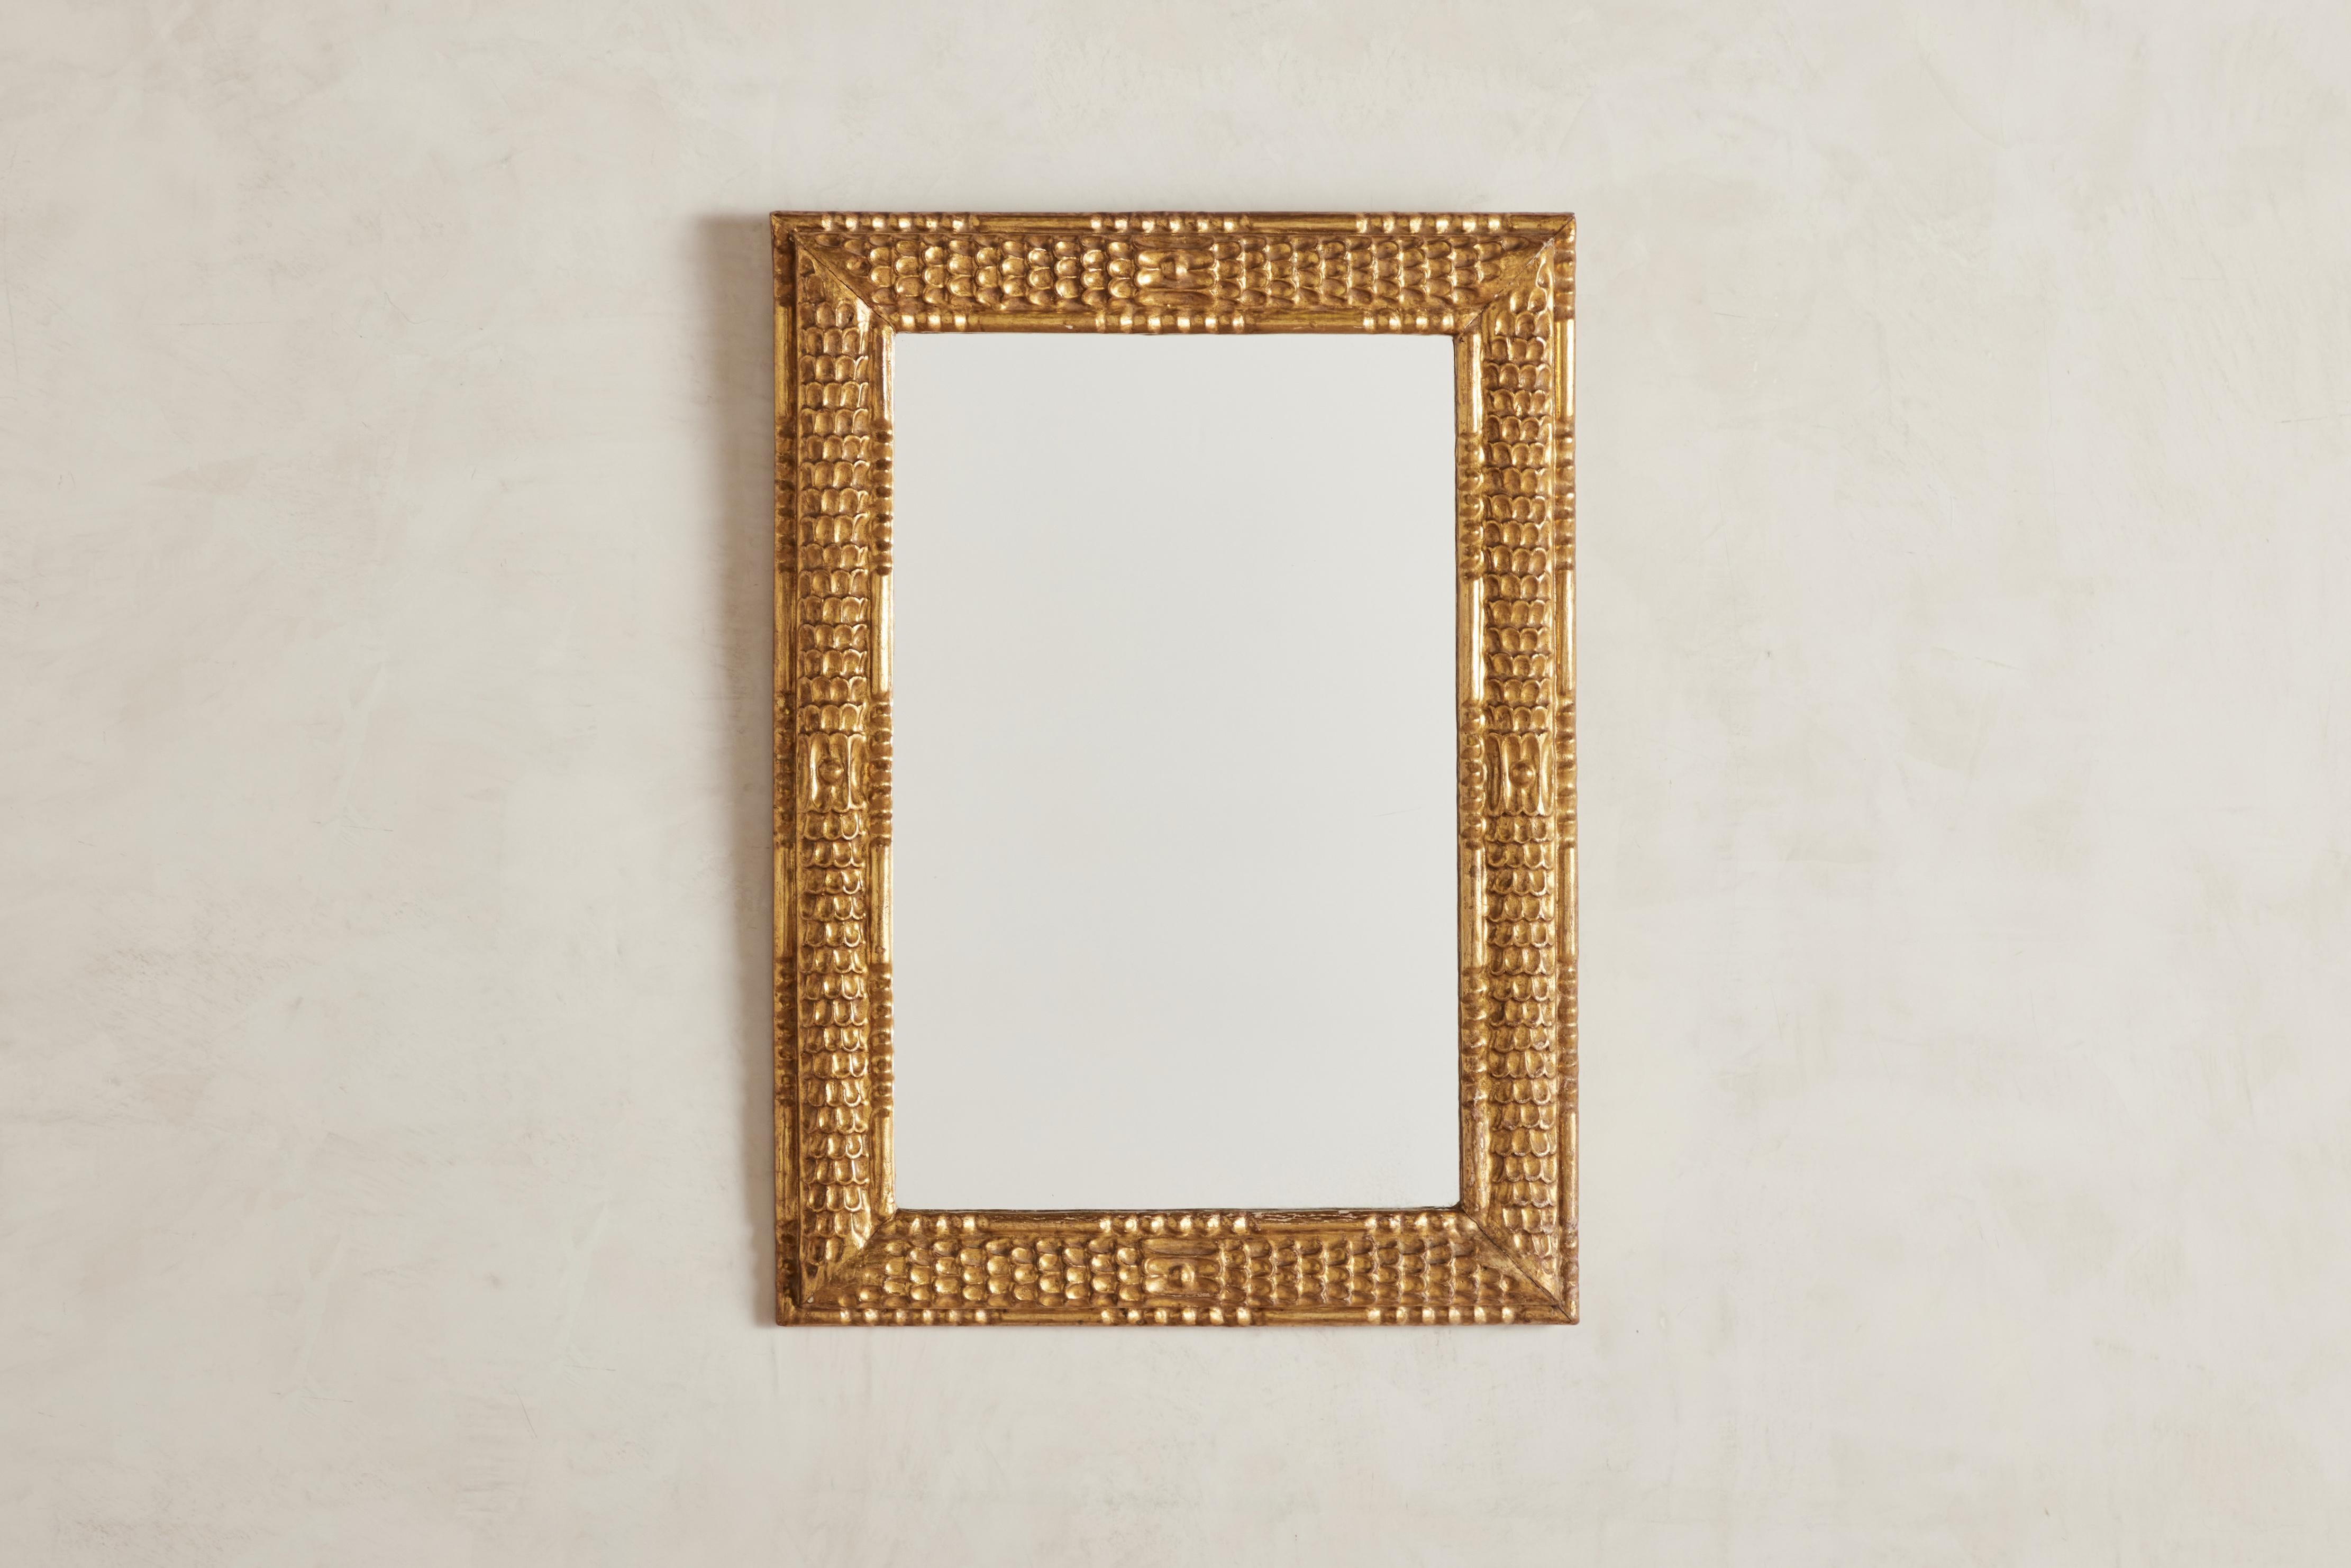 Ornate gold leaf Colonial Revival wall mirror from Mexico circa 1960. 